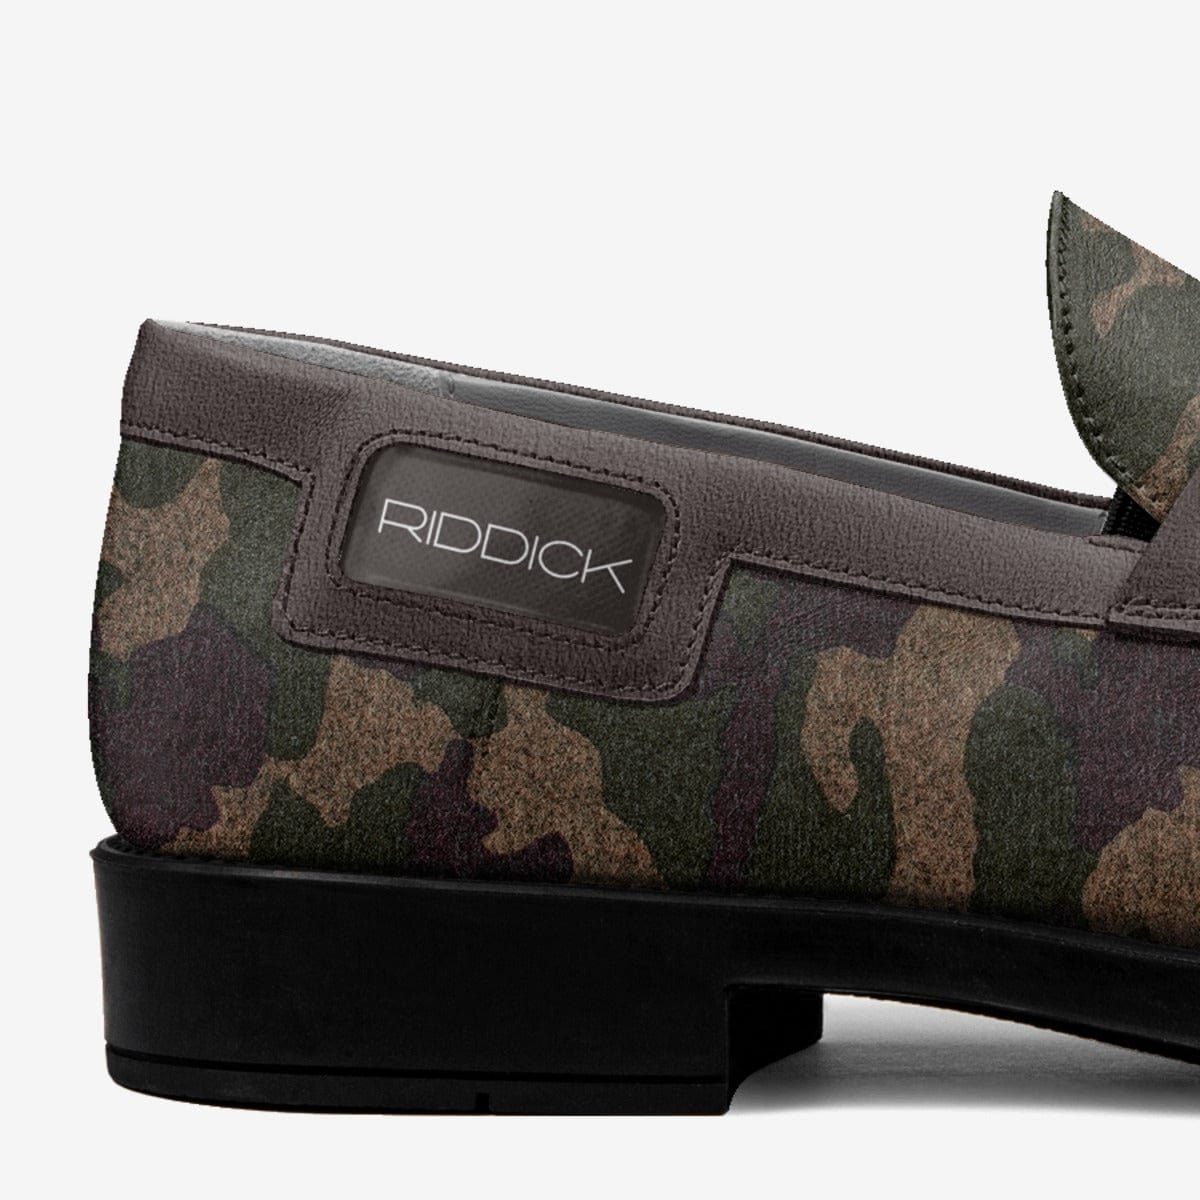 EXEC, THE TASSEL (IN CAMO) - Riddick Shoes Shoe Riddick Shoes   